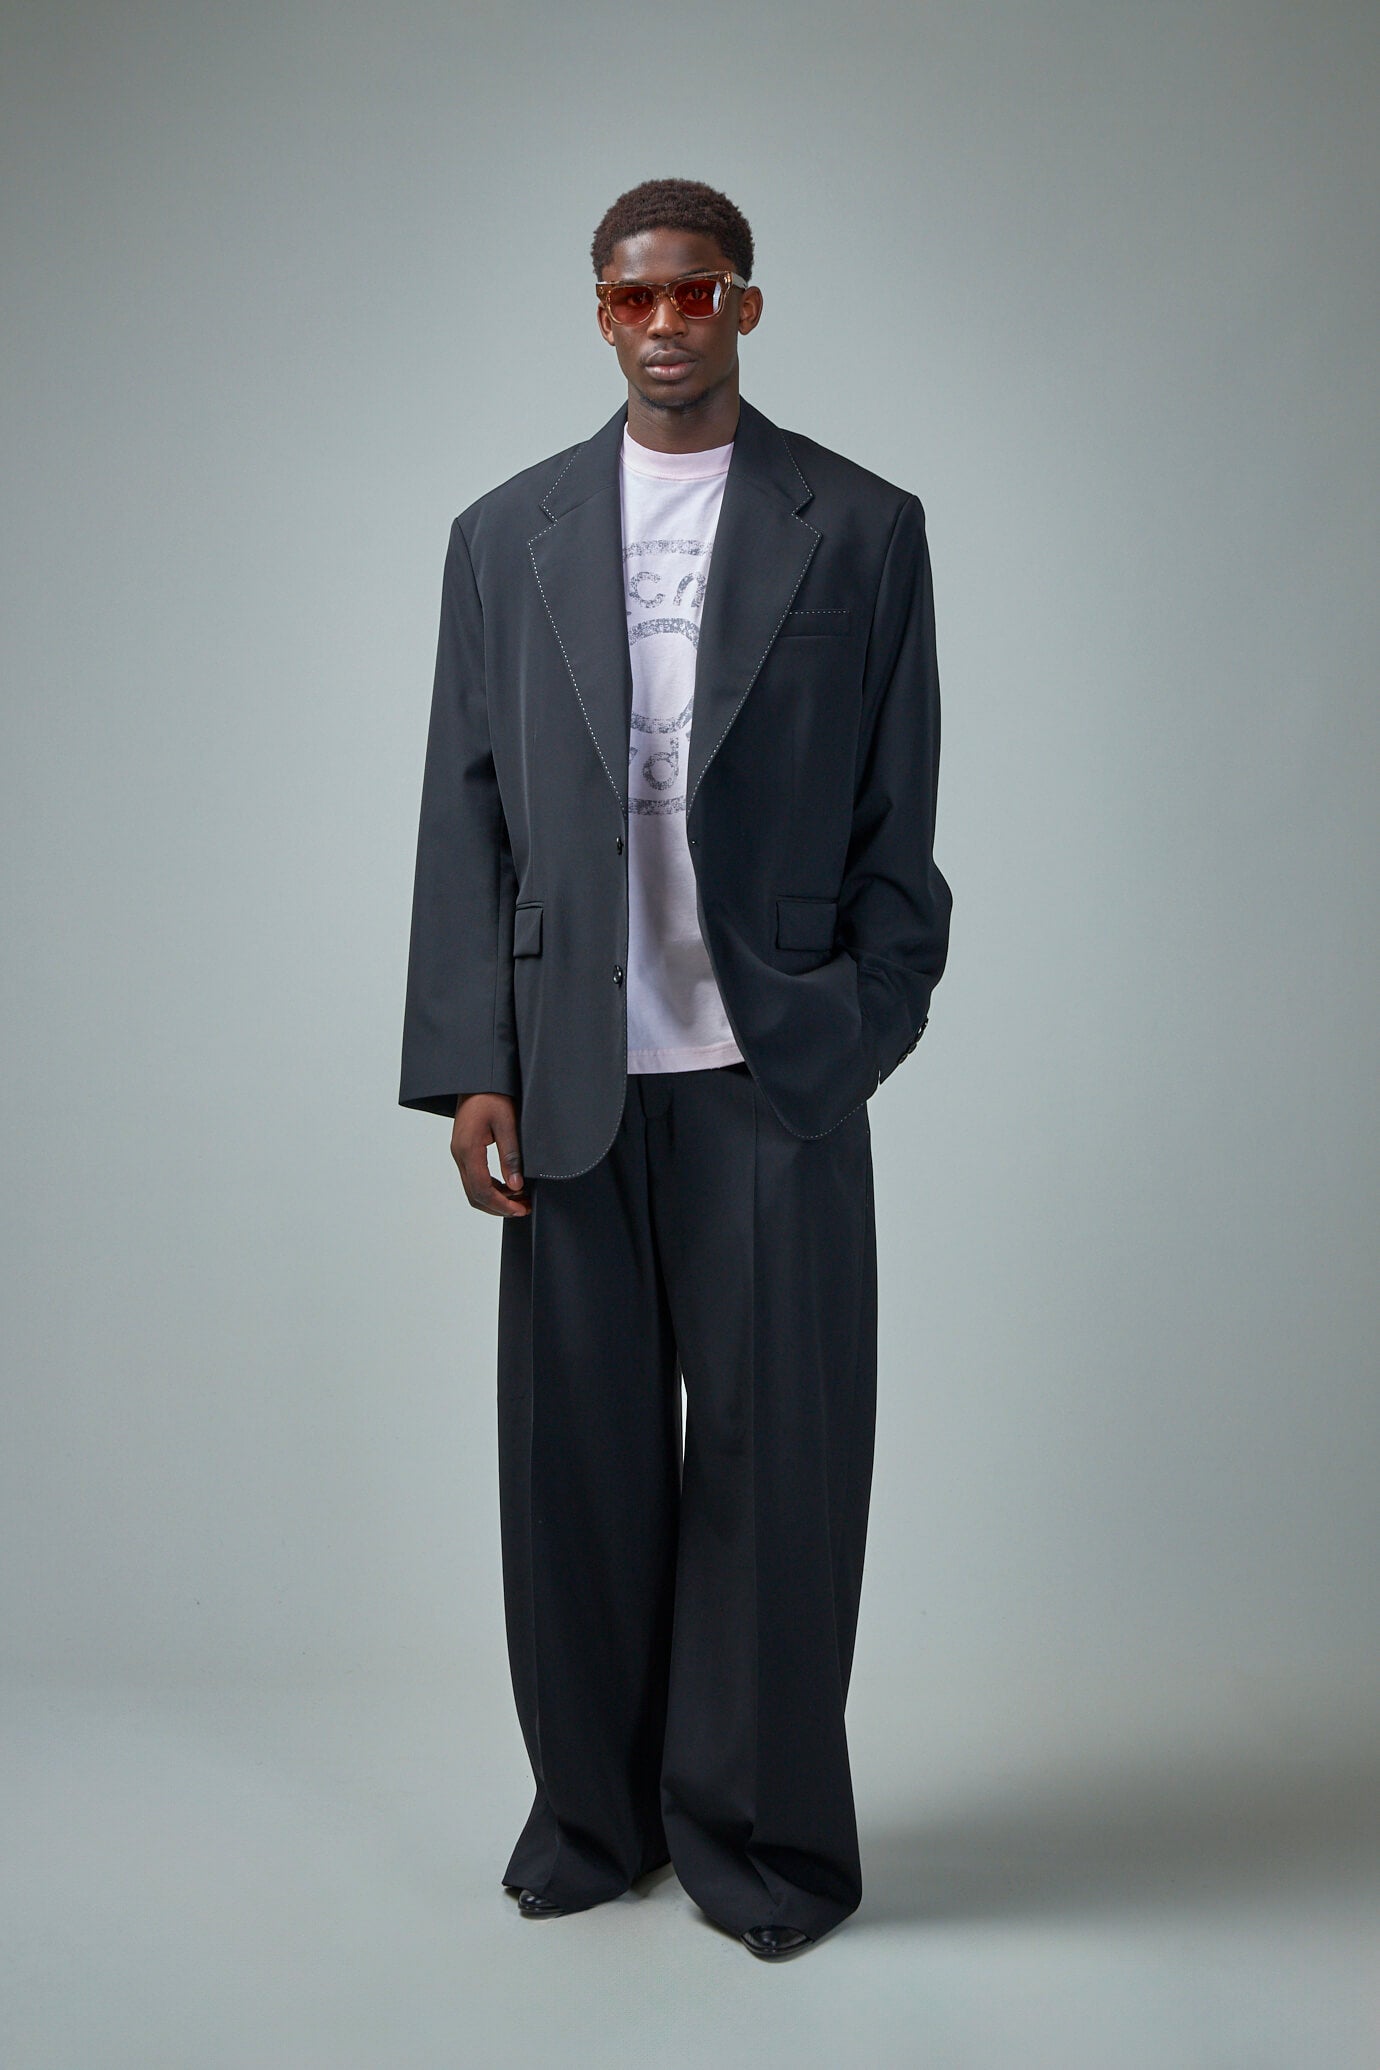 Twill Cotton Blend Trousers